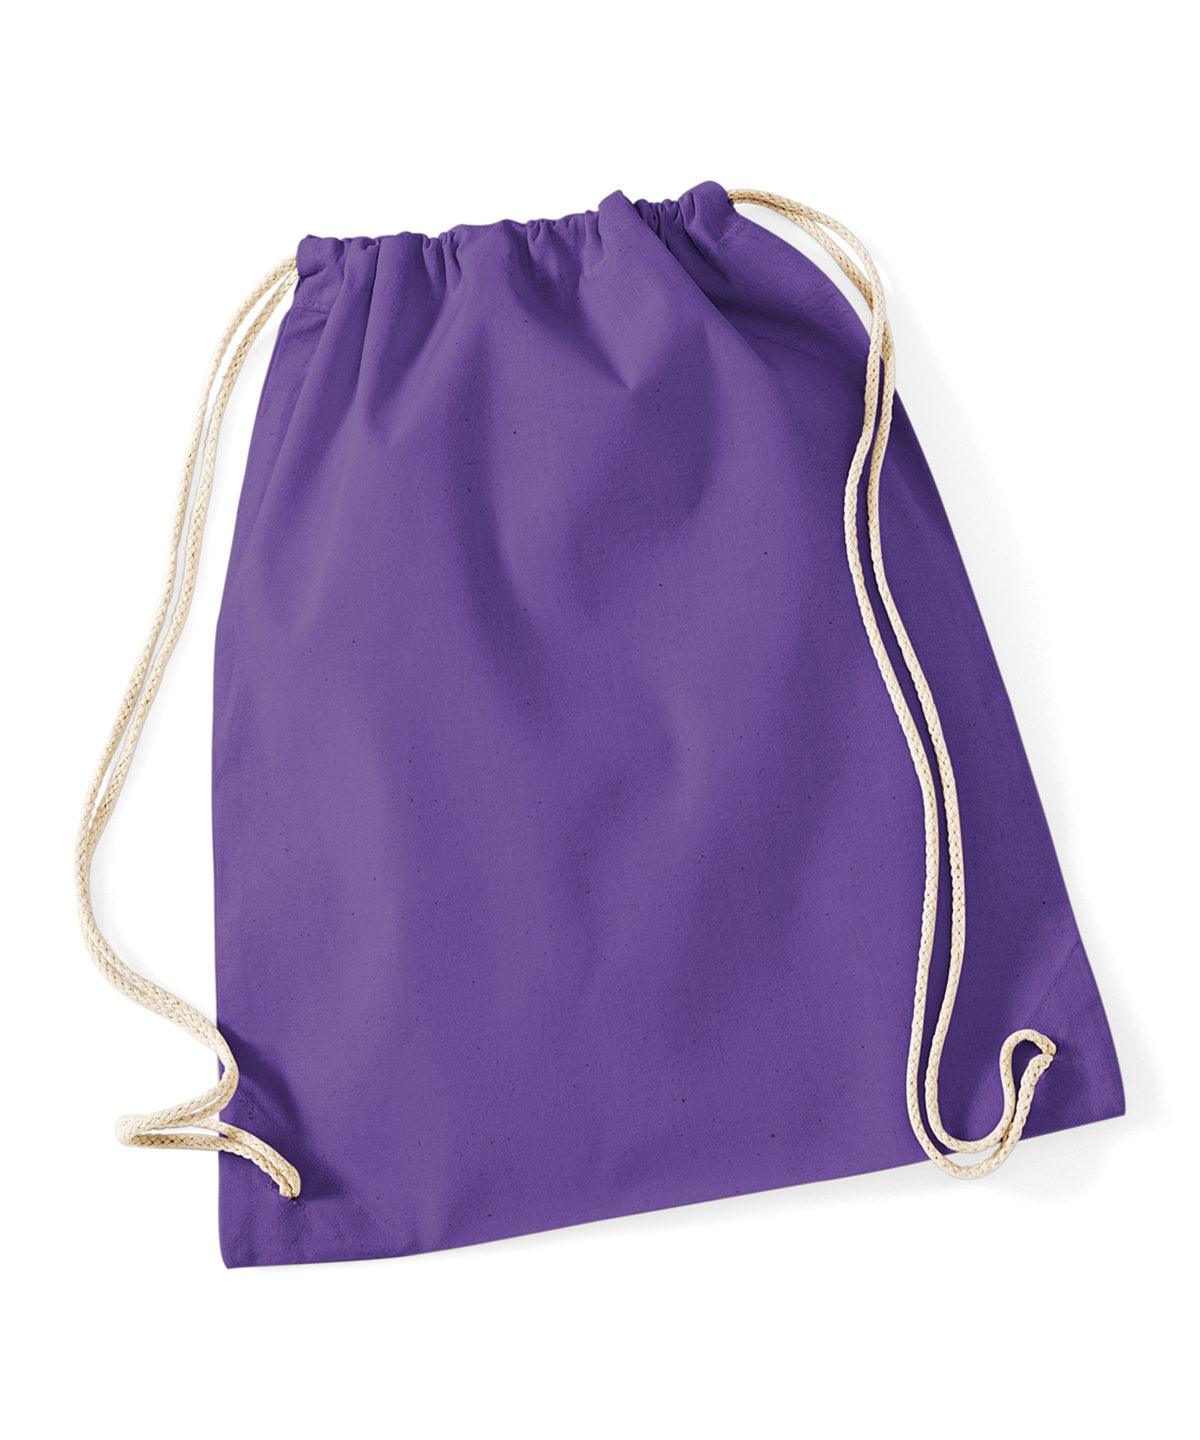 Purple - Cotton gymsac Bags Westford Mill Bags & Luggage, Junior, Must Haves, Pastels and Tie Dye Schoolwear Centres